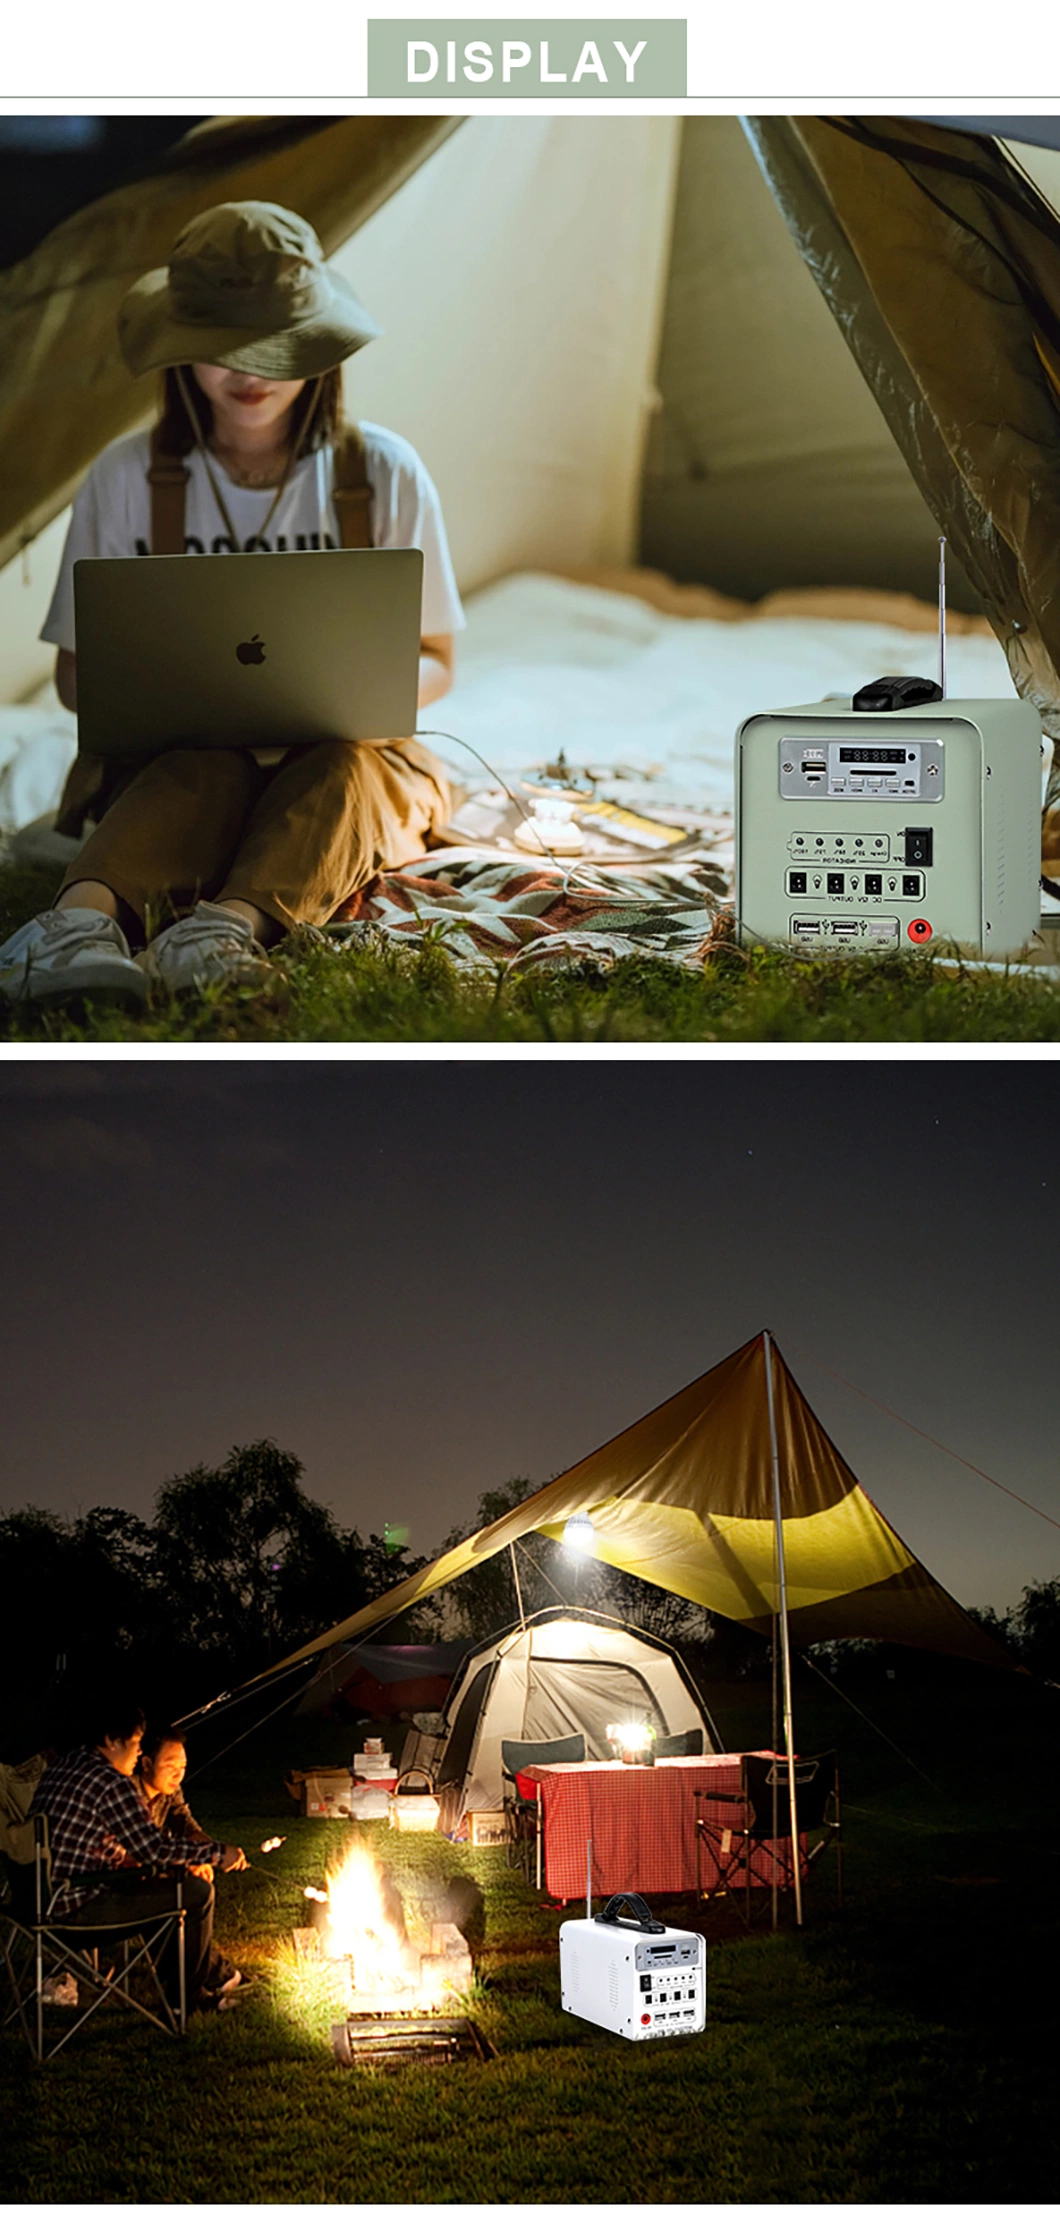 Multifunctional Energy Storage Mobile Power Supply Outdoor Power Supply Charging LED Light Solar Power Bank System